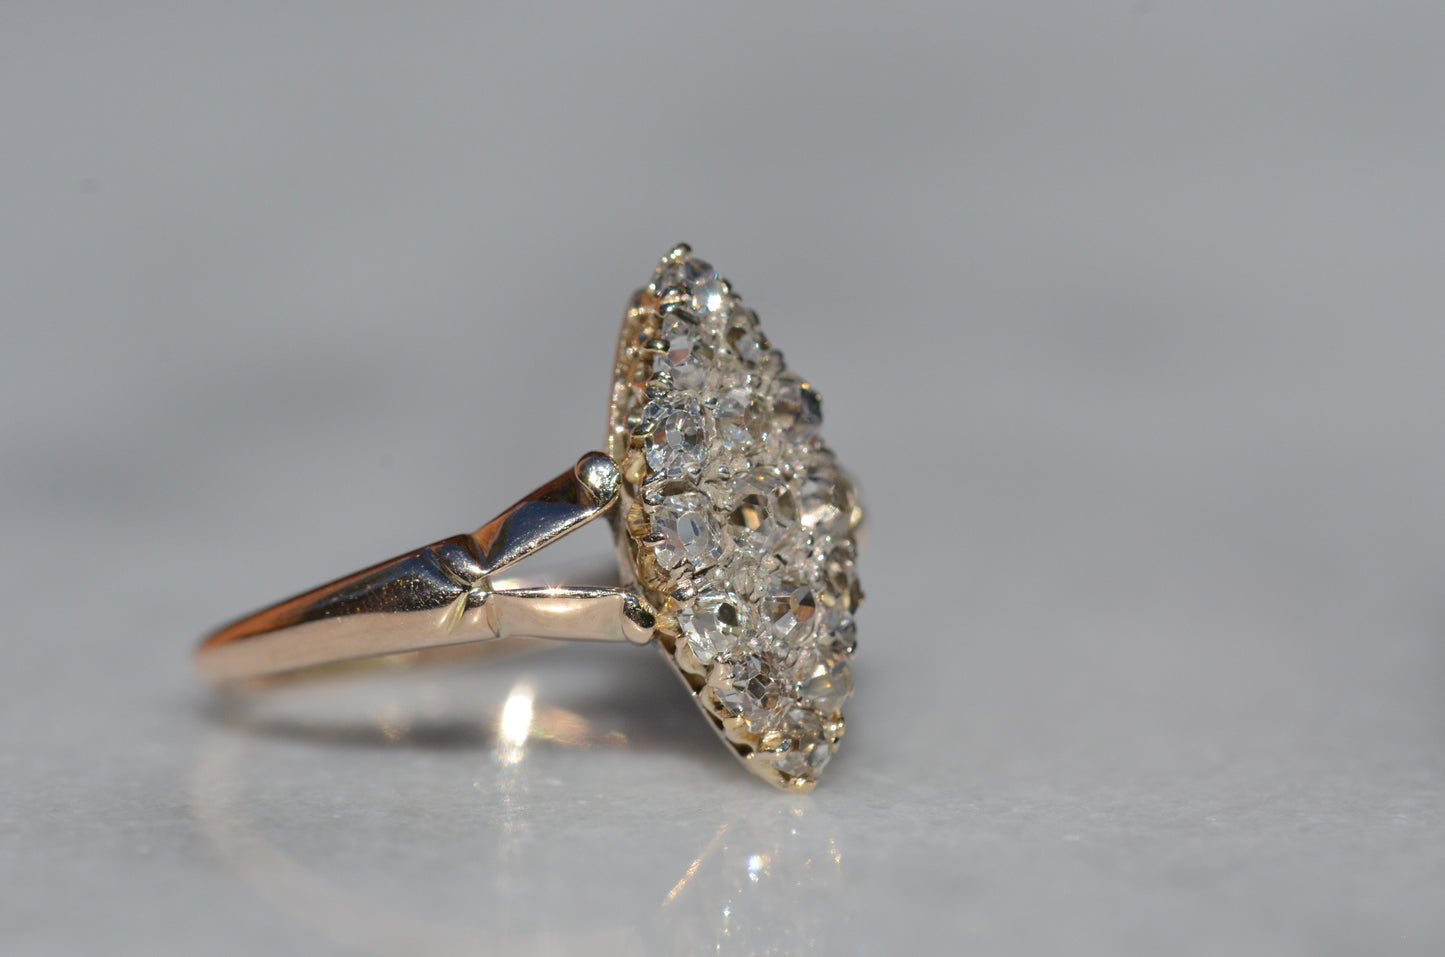 The closely cropped macro of this Victorian diamond navette ring is photographed turned to the right to highlight the split shoulder detail of the band.